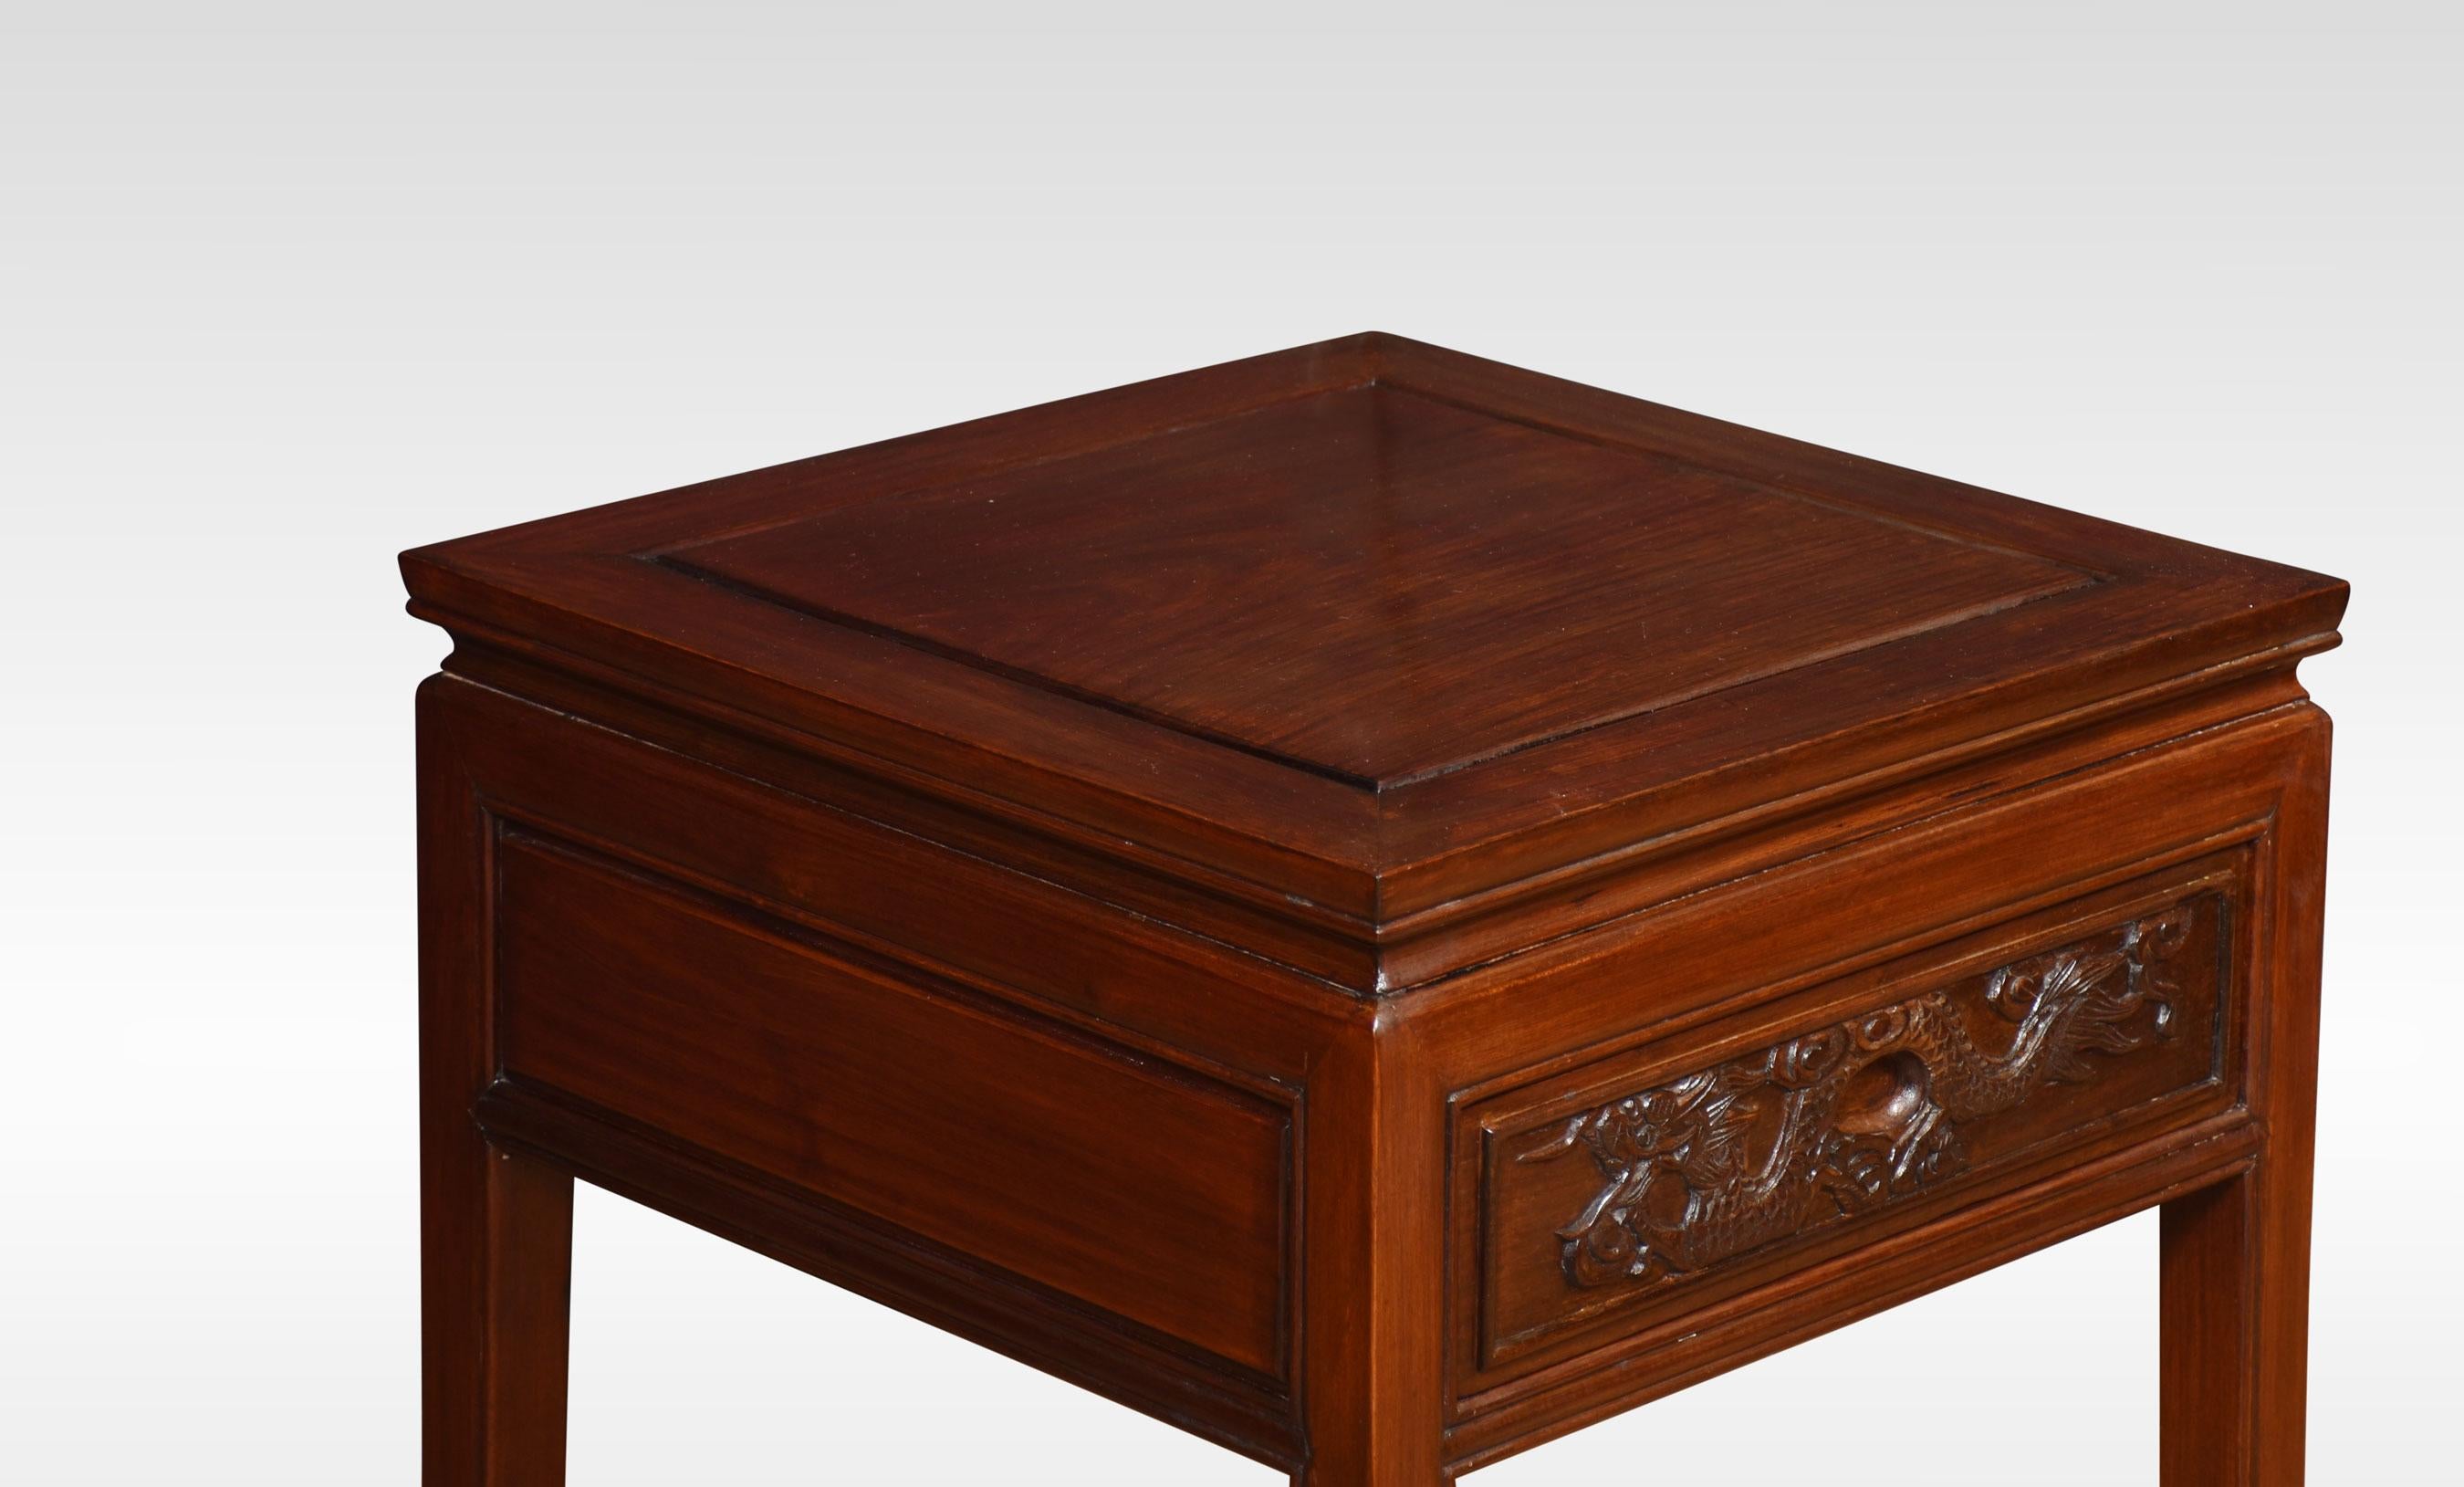 Pair of Chinese bedside tables having square molded tops above carved freeze drawer all raised up on four stylized legs.
Dimensions
Height 22.5 Inches
Width 20 Inches
Depth 20 Inches.